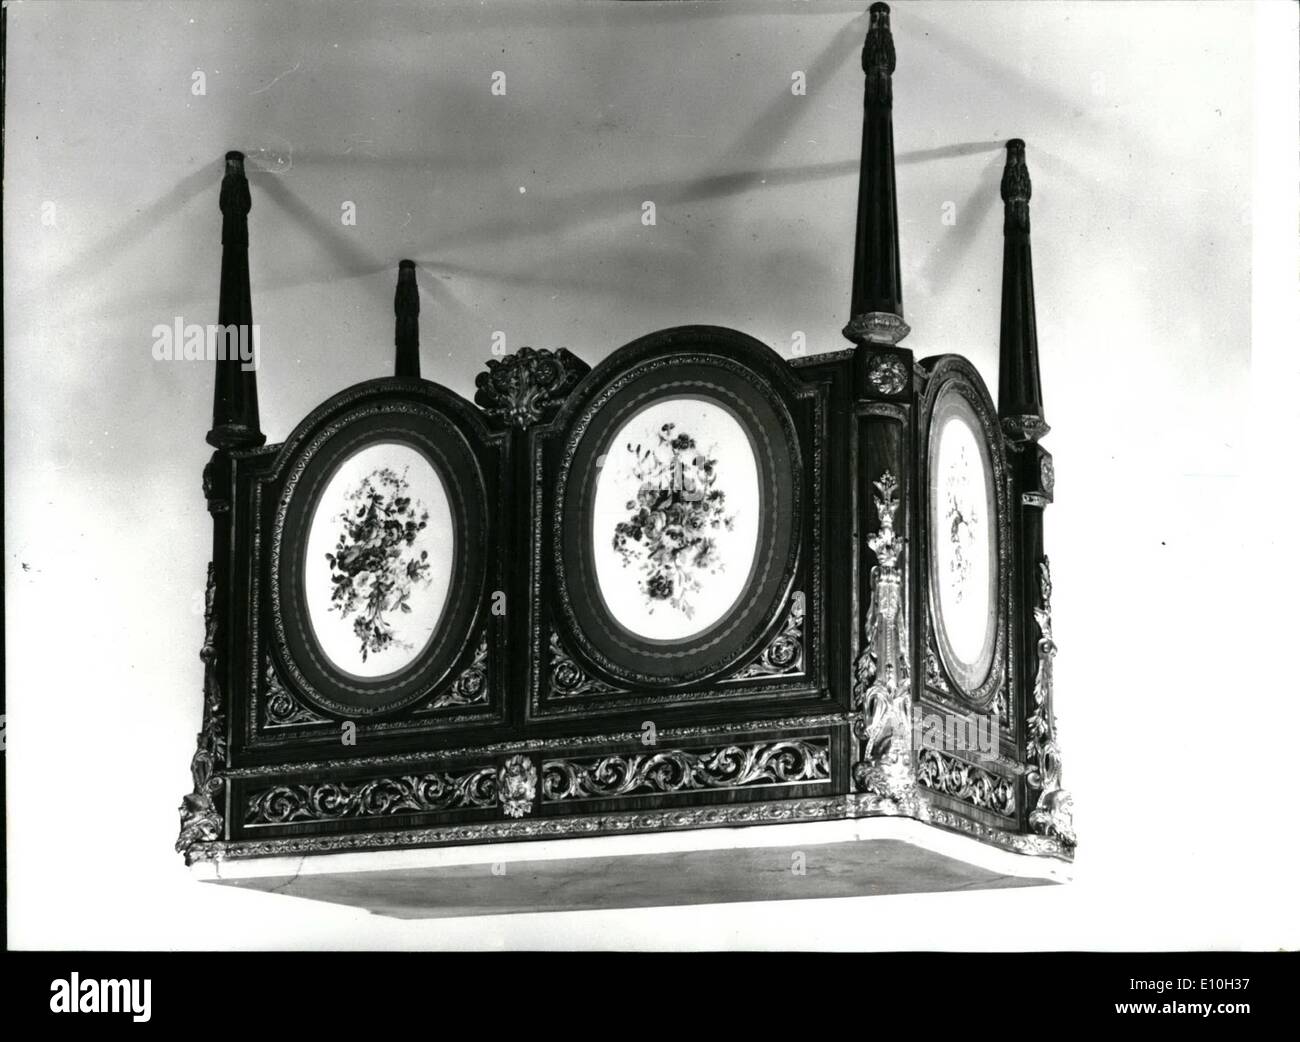 Nov. 11, 1972 - Furniture ETC From Rothschild's Ferrieres To Be Sold At Sotheby's: Magnificent 18-th century French furniture etc, from Ferrieres, the vast Rothschild estate near Paris, will be put up for sale by Baron Guy de Rothschild at Sotheby's on Friday, 24 November. There will be 34 lots in the sale, most of them from the collection of Baron Alphonse de Rothschild who died in 1905 Stock Photo